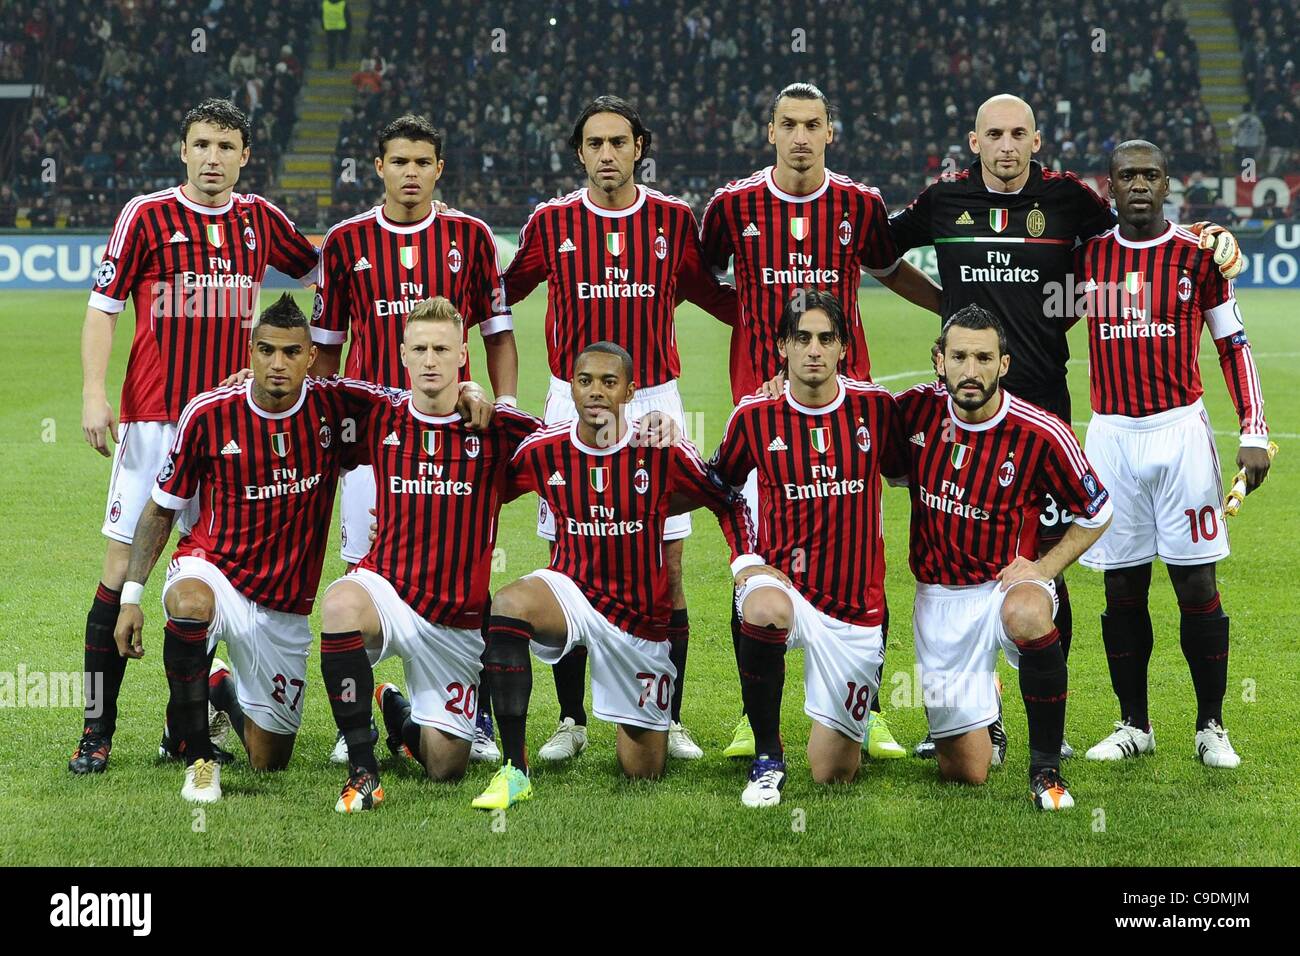 jug Hates Absay 23 11 2011 ImagePhoto MG Milano 23 11 2011 Champions League AC Milan versus  Barcelona Group stages. Photo Team line-up for AC Milan before the game  starts Stock Photo - Alamy